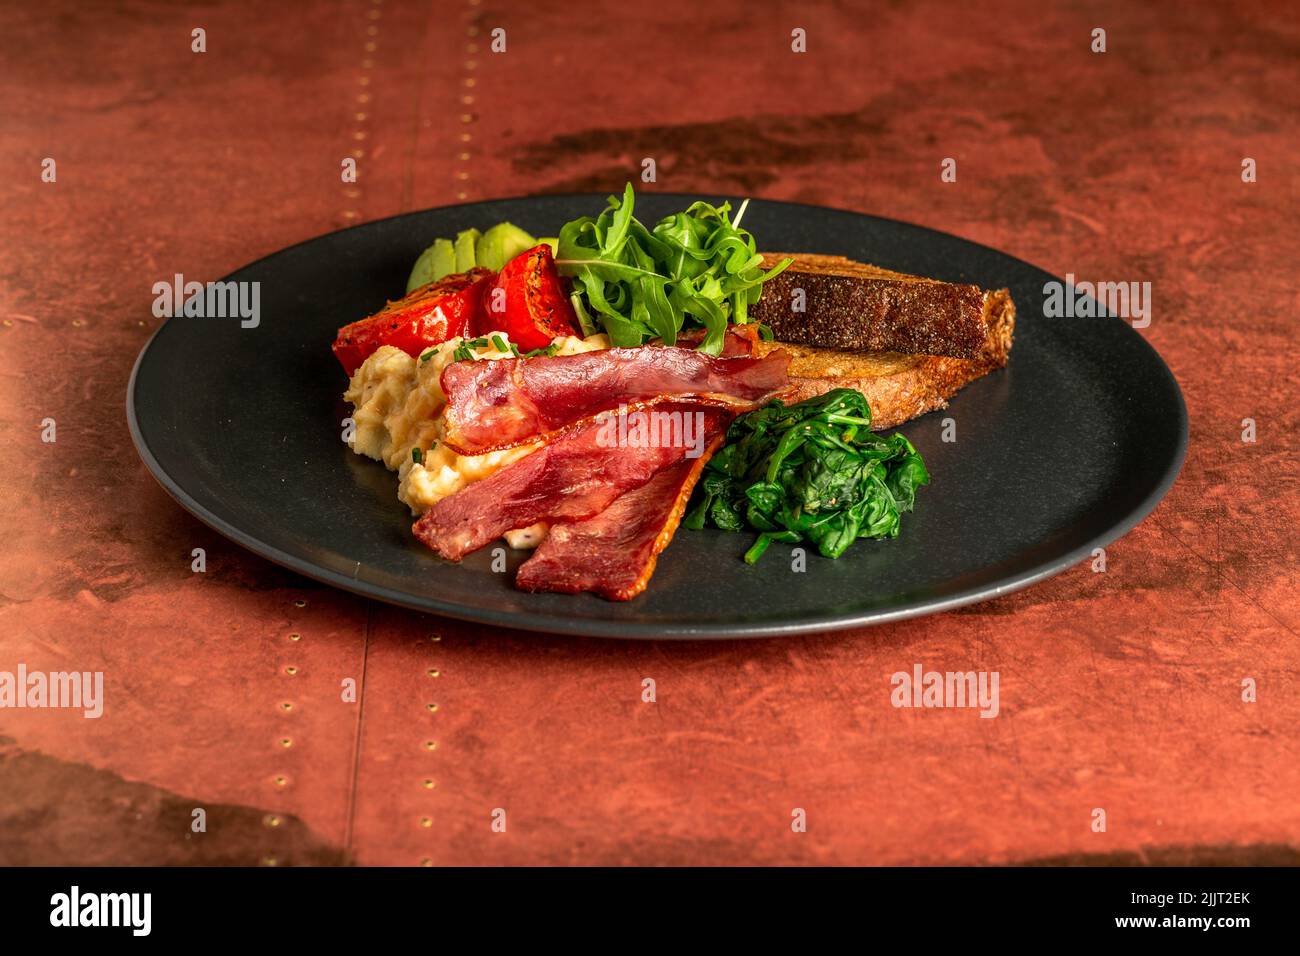 An appetizing breakfast with fried bacon, tomato, avocado, bread and some greens Stock Photo